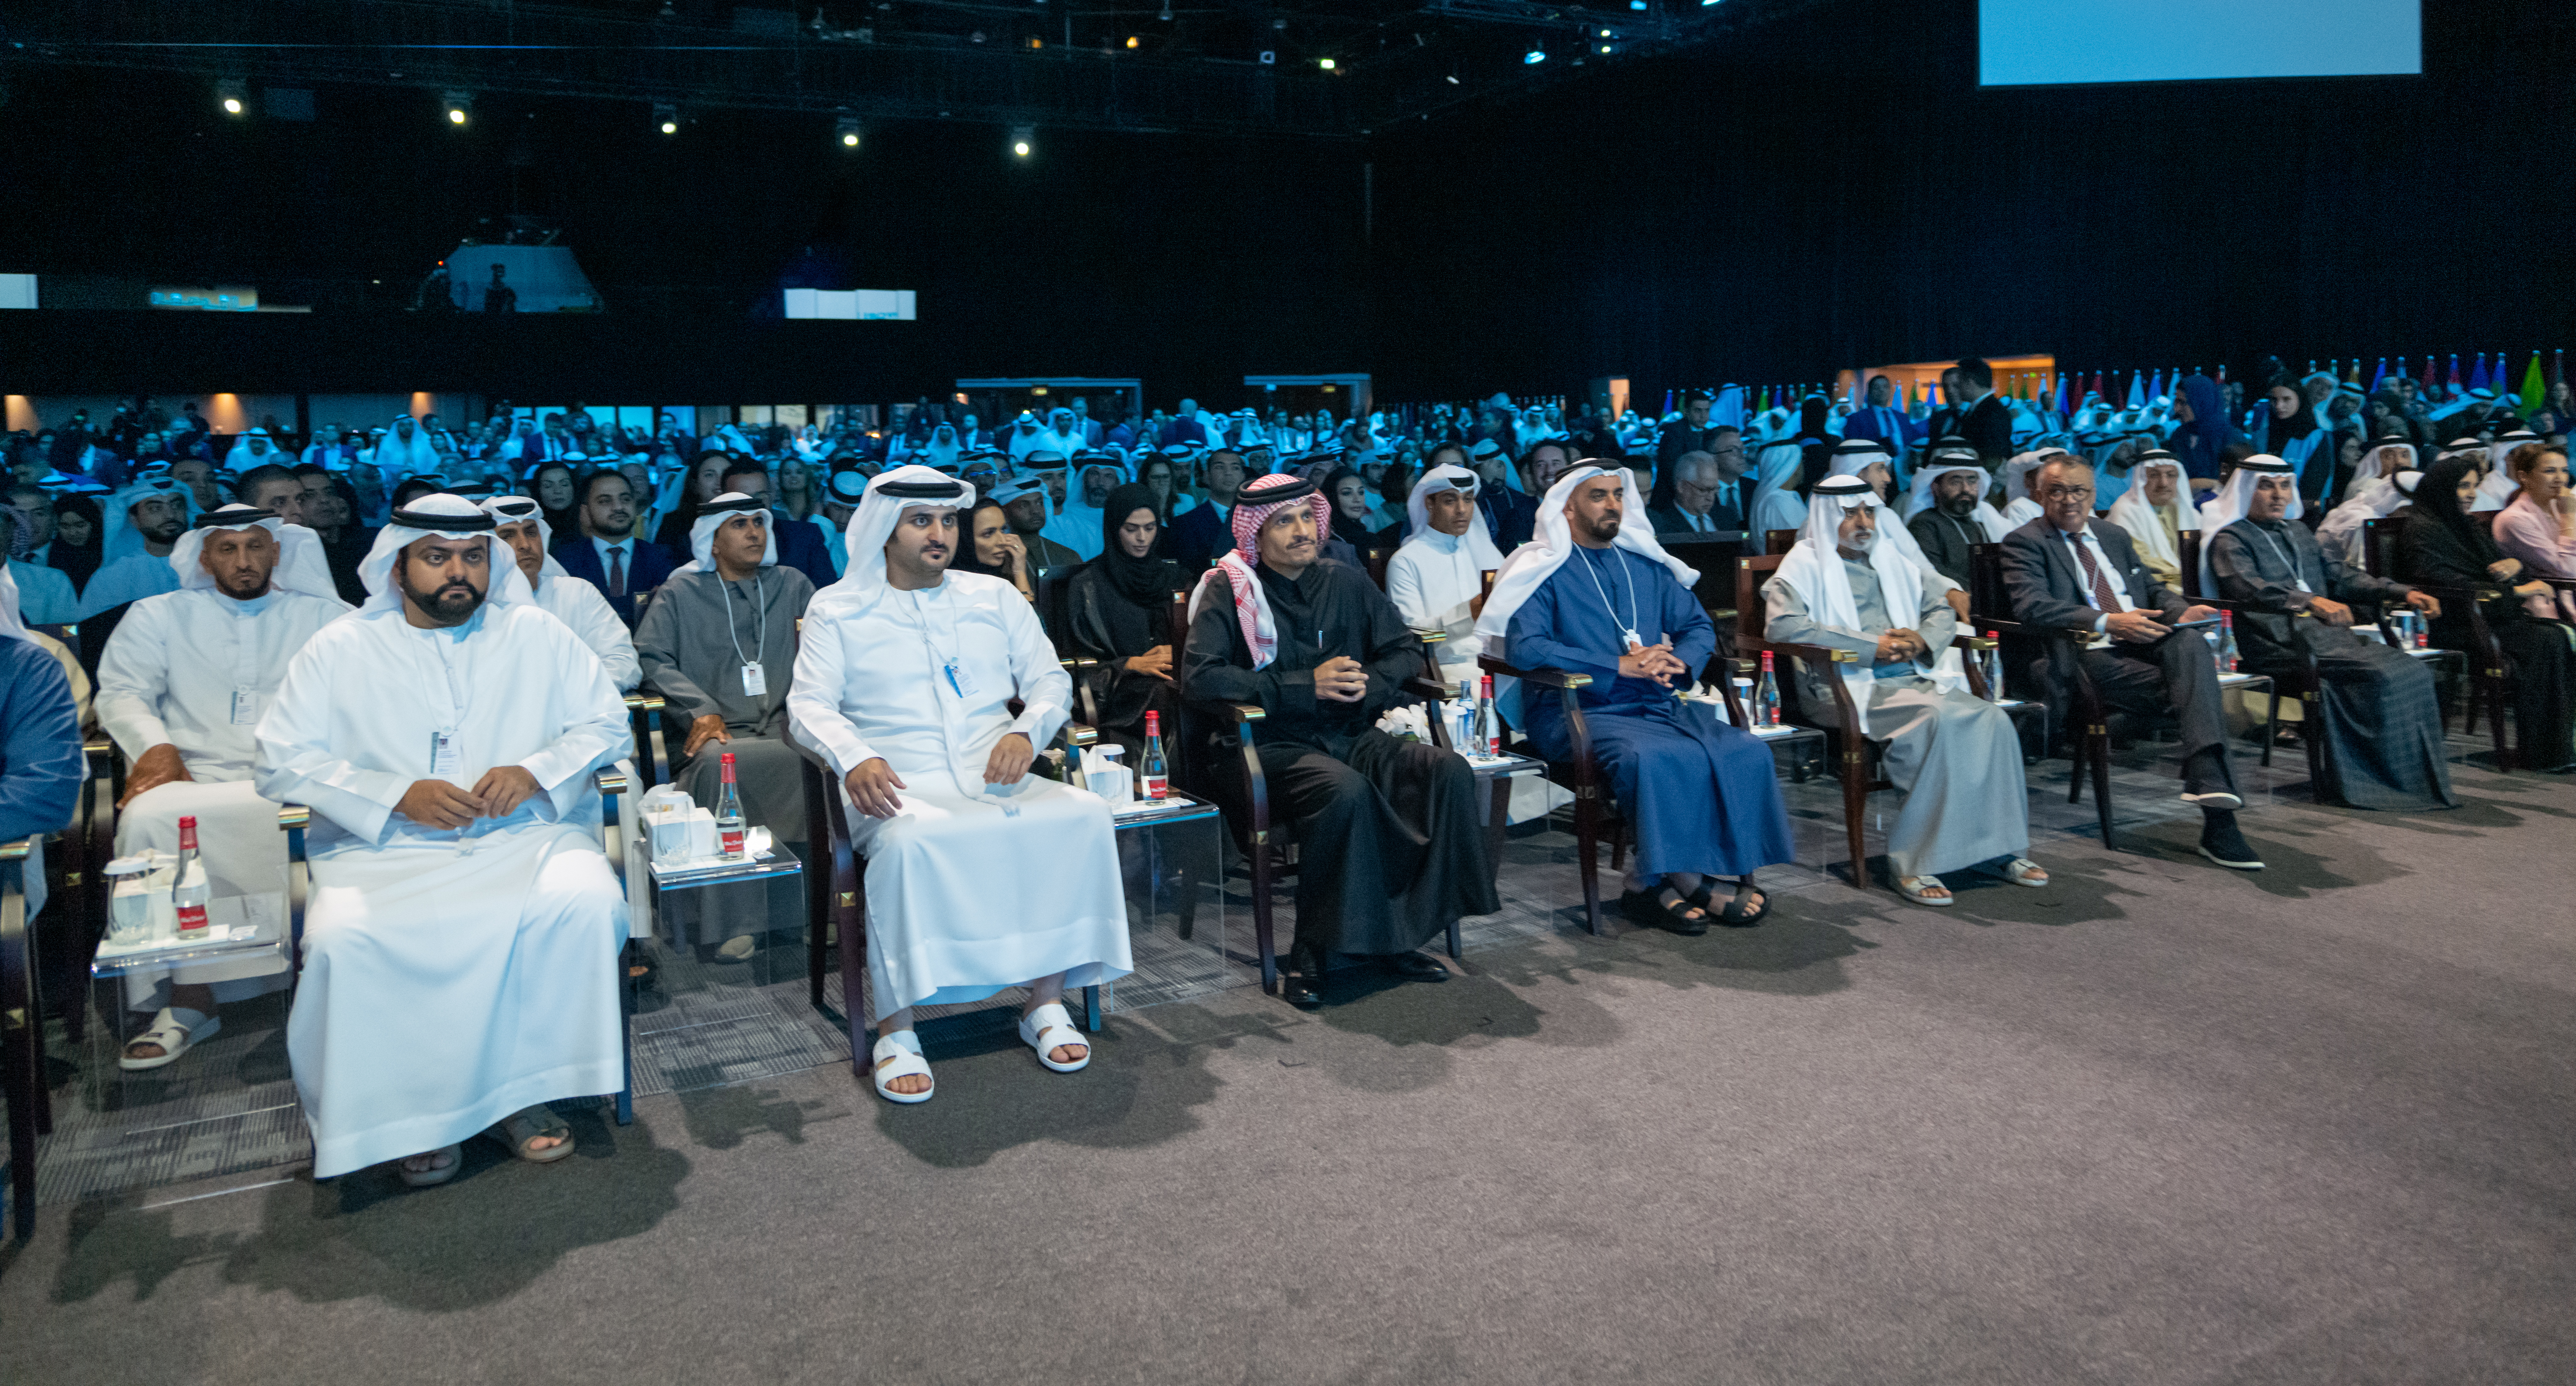 Prime Minister and Minister of Foreign Affairs Takes Part in World Governments Summit in Dubai